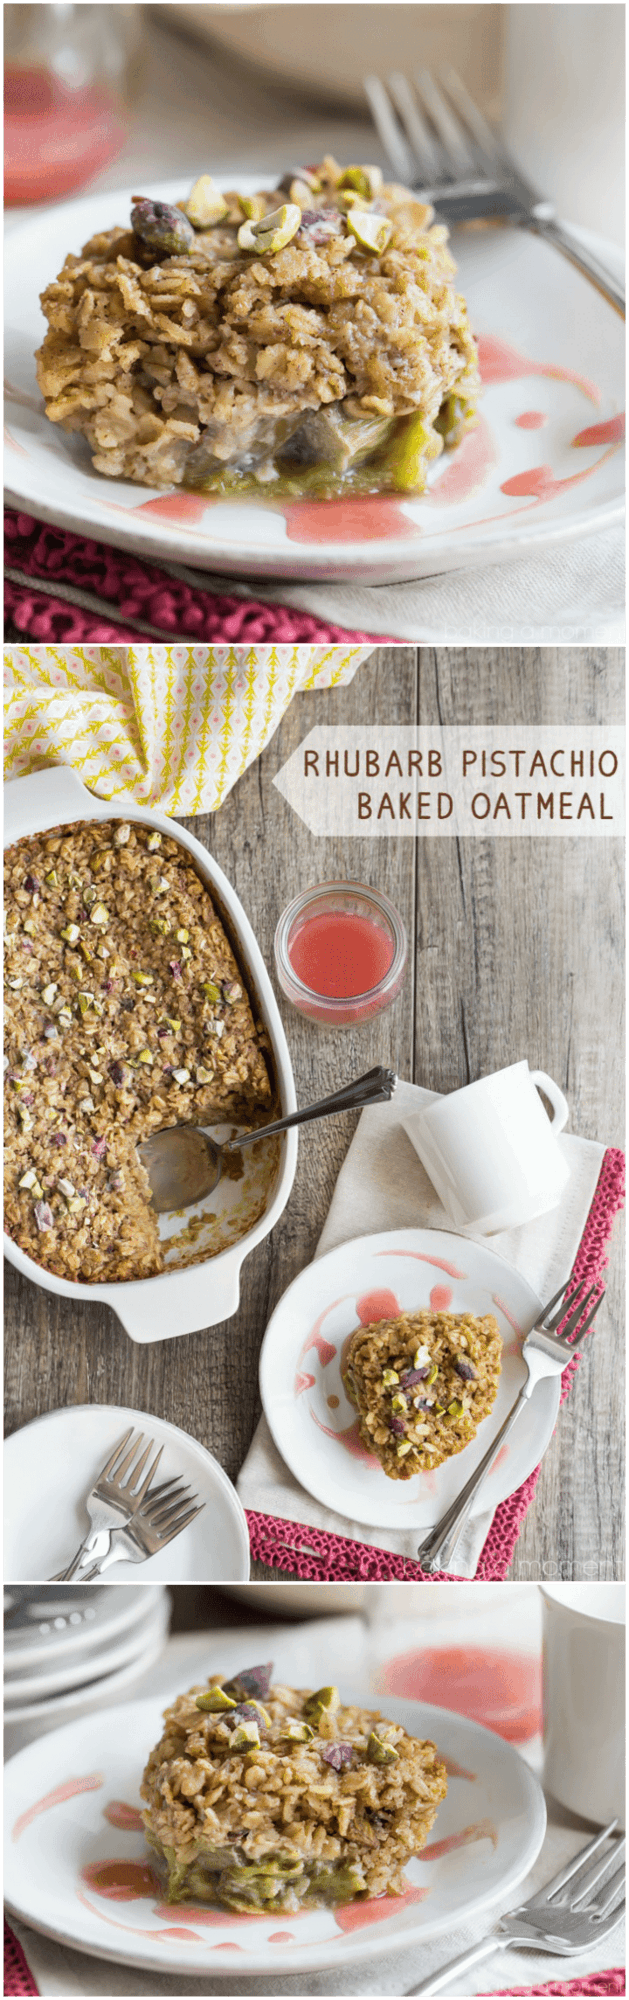 Rhubarb Pistachio Baked Oatmeal: Perfect for a Spring brunch! 